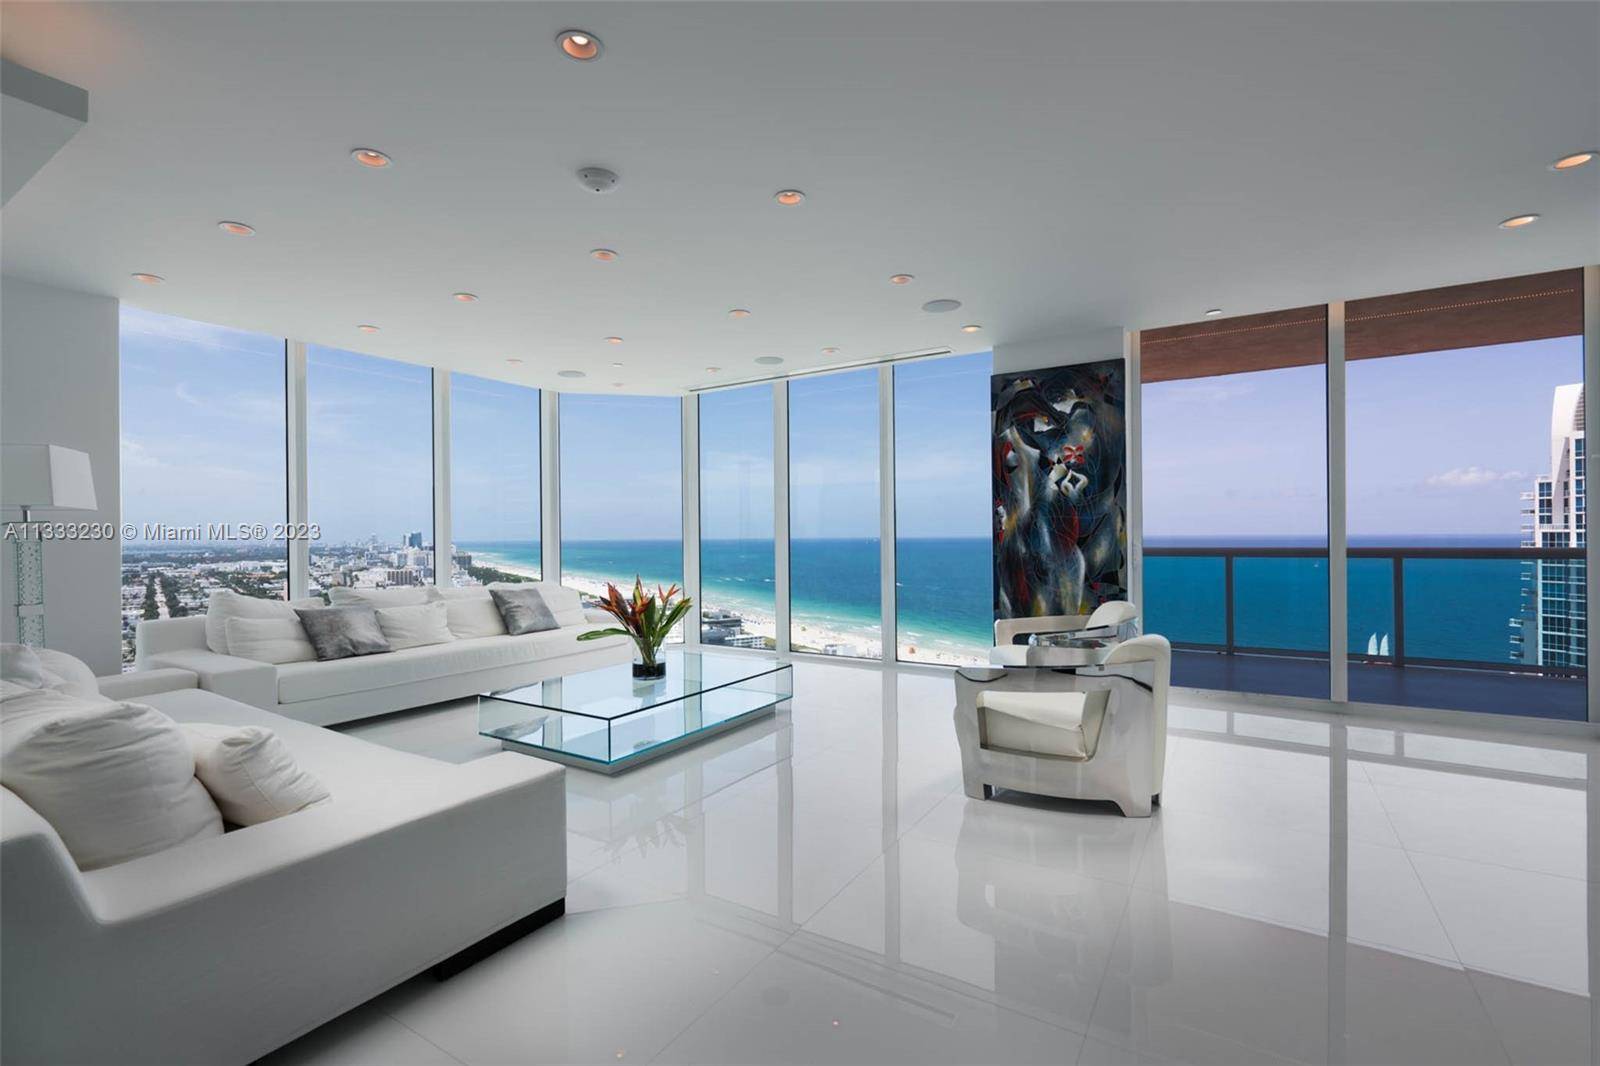 Large 4, 723 sq ft. Rare double unit with panoramic views of beach, ocean, bay, Miami skyline and cruise ships, South Pointe Park.